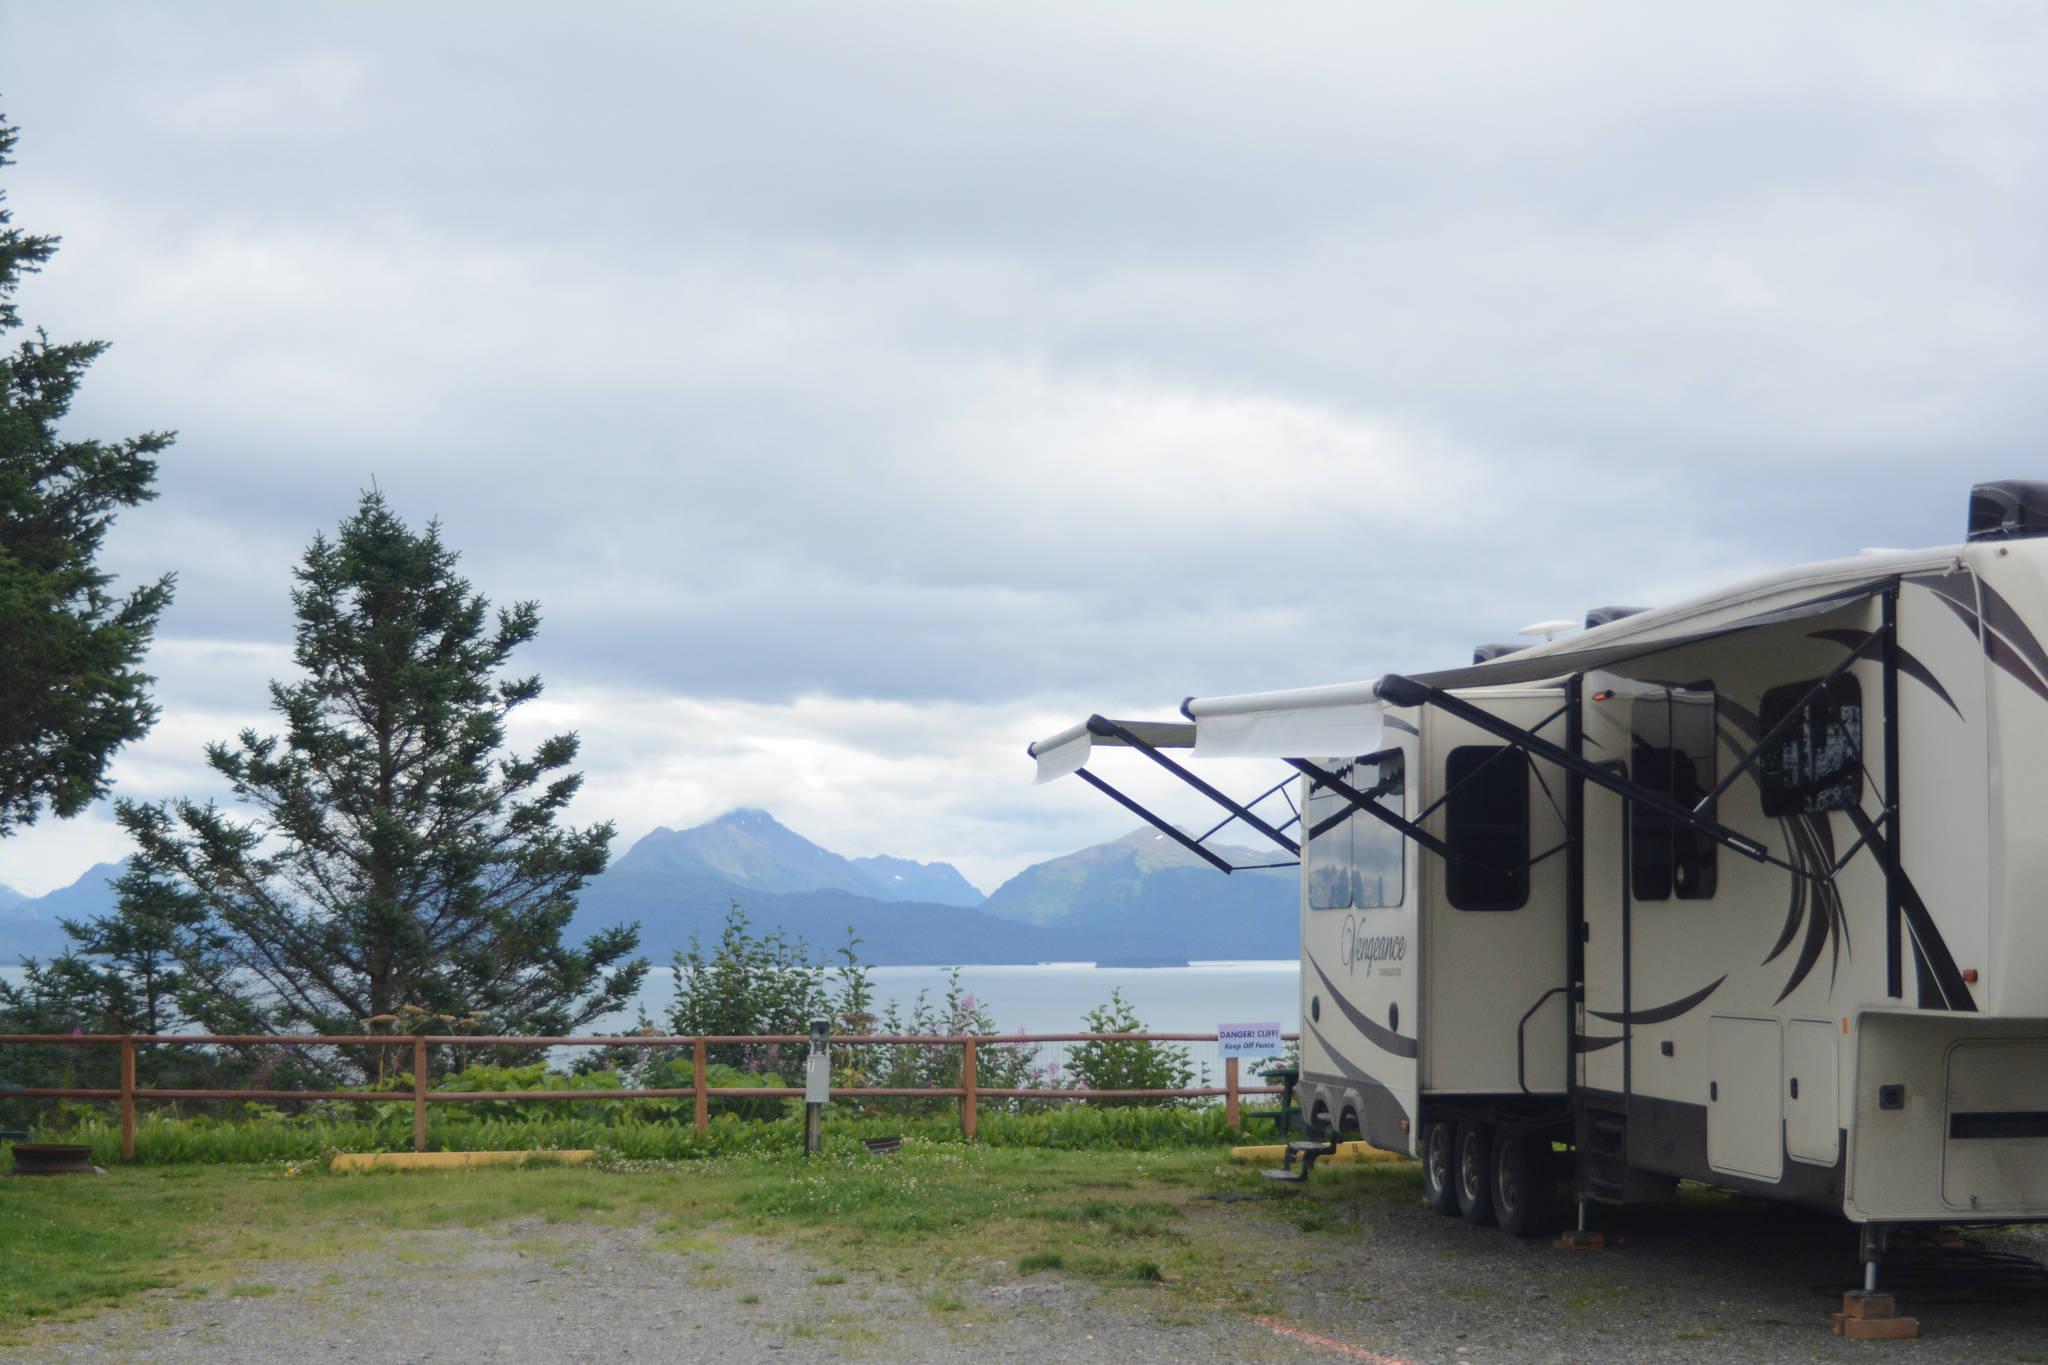 A campsite at Baycrest RV Park looks out over Kachemak Bay near Baycrest Hill in Homer, Alaska, on Aug. 18, 2018 at The Homer/Baycrest KOA Campground near Baycrest Hill in Homer, Alaska. Formerly the Baycrest RV Park, owners Shelly and Jeff Erickson made it a KOA campground in the fall of 2017. (Photo by Michael Armstrong/Homer News).